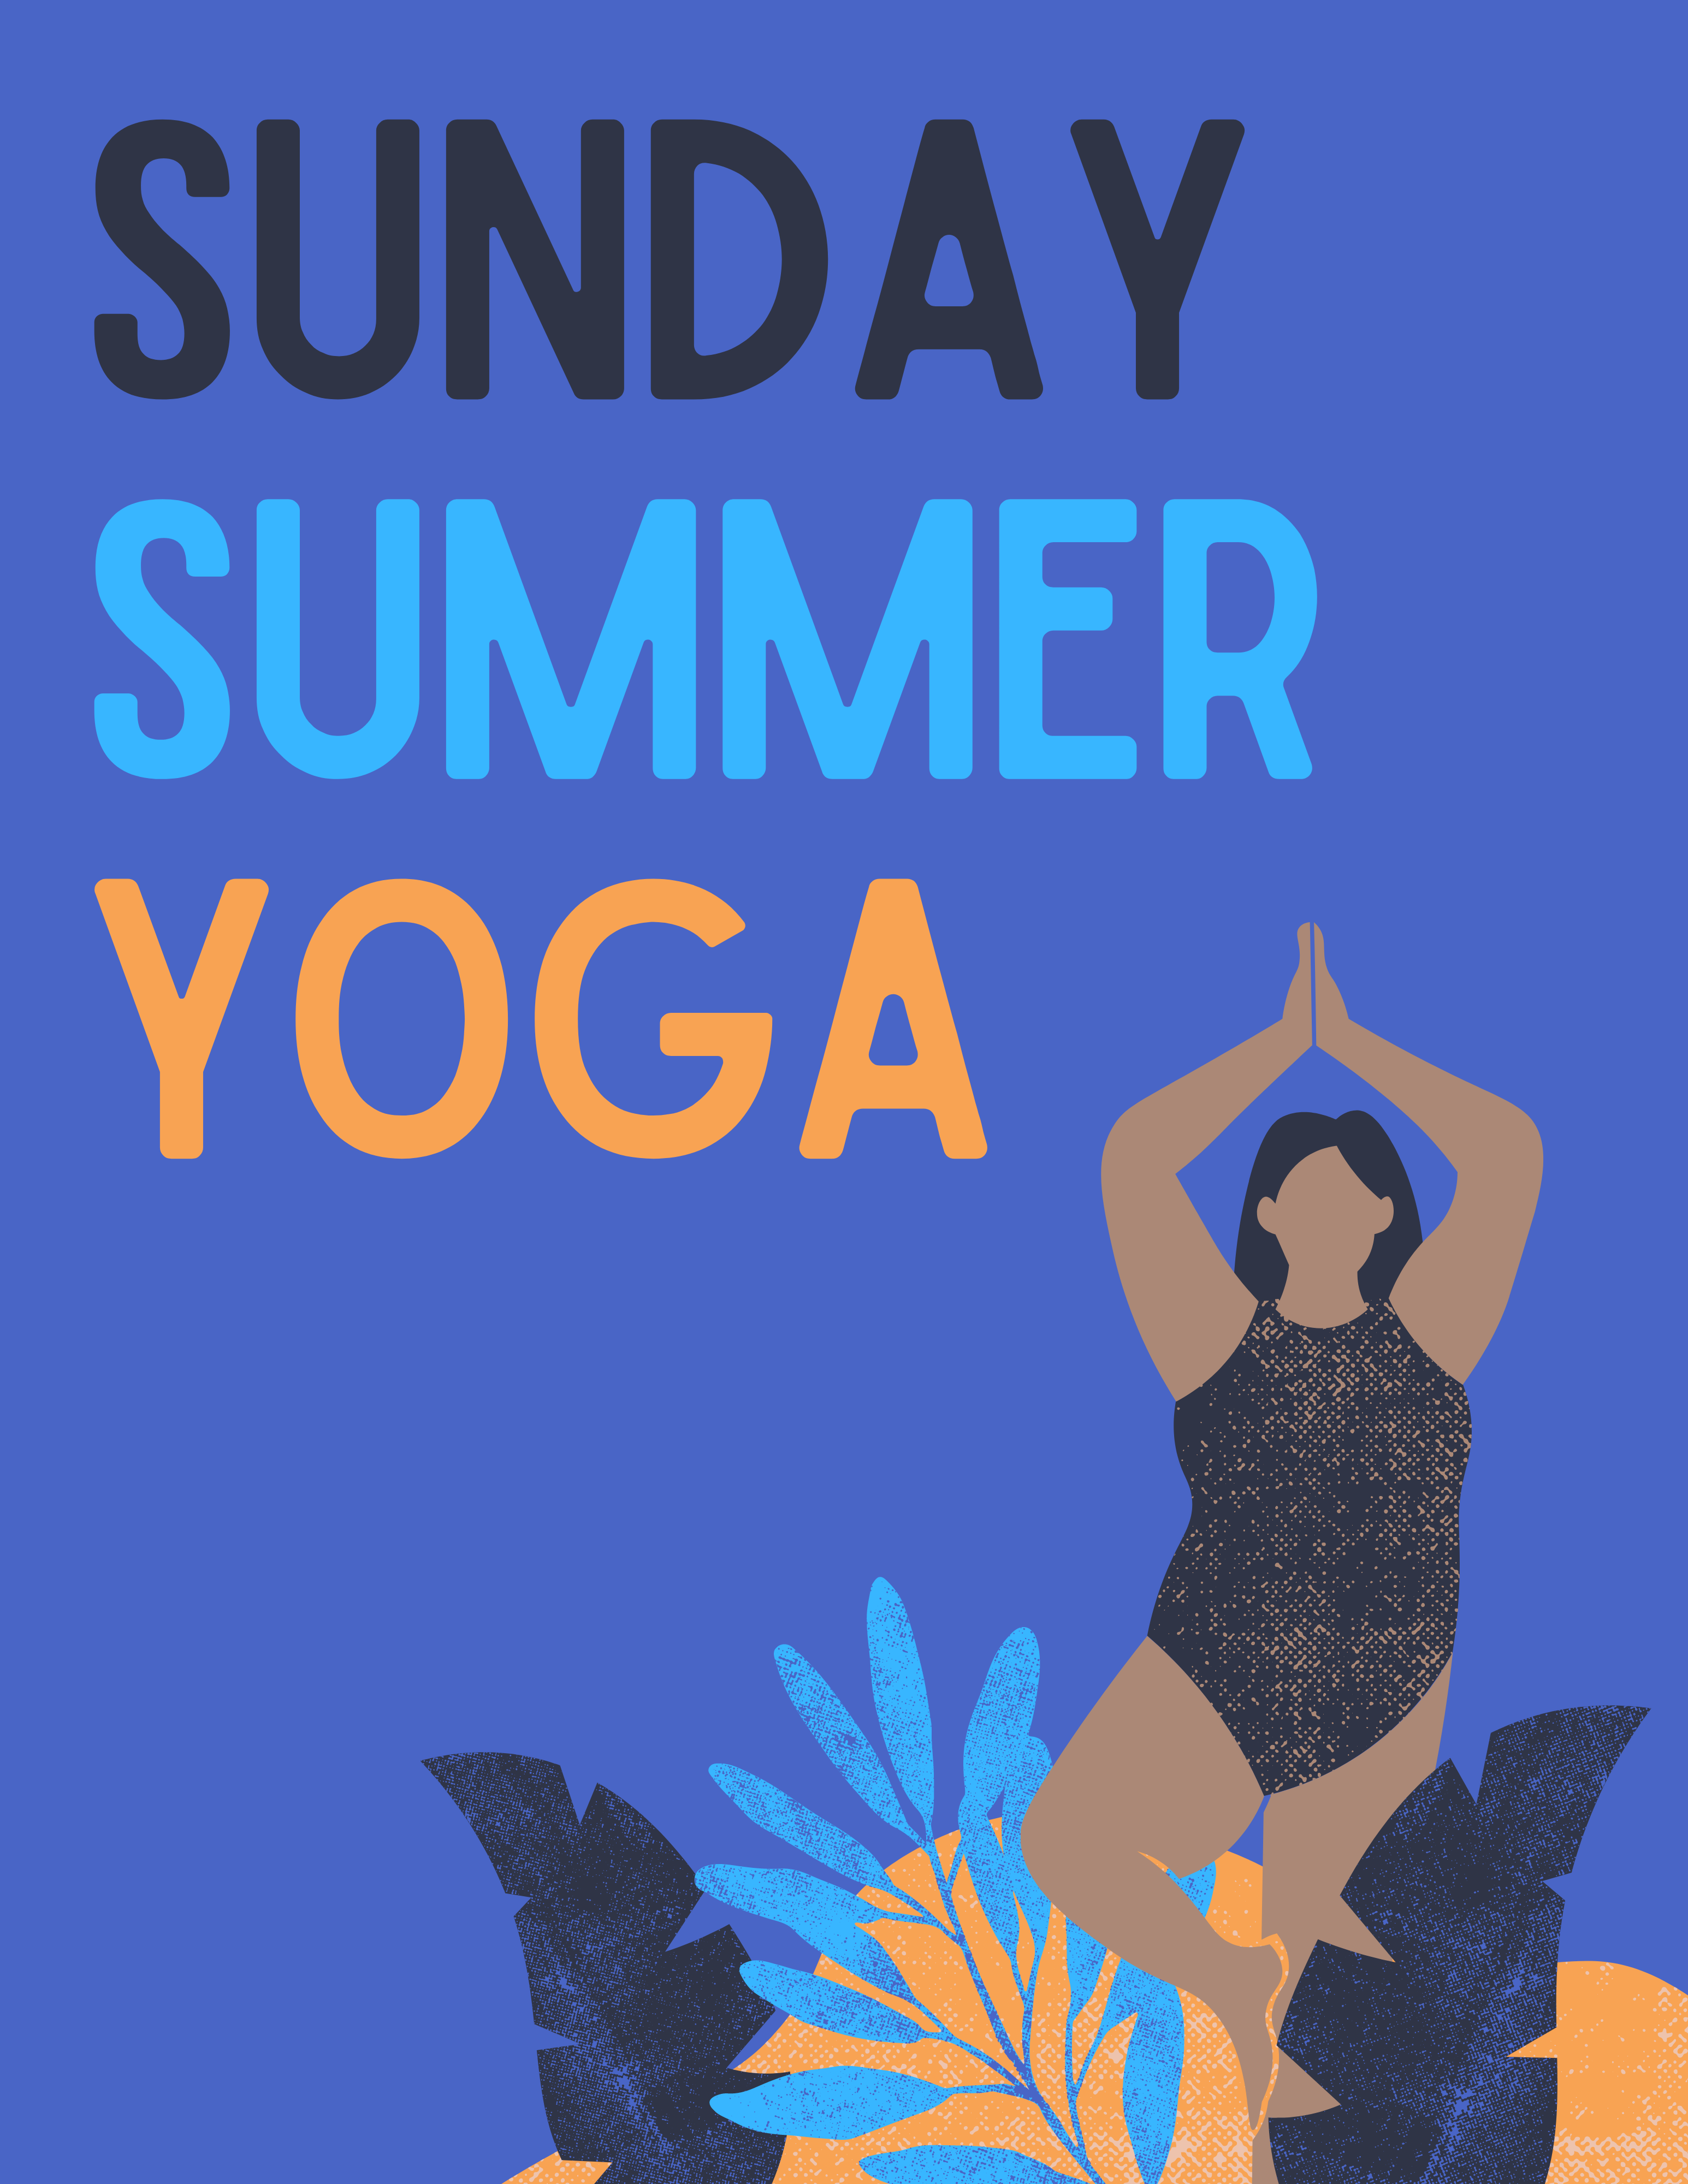 Sunday Summer Yoga, accompanied by illustration of woman in tree pose, surrounded by foliage